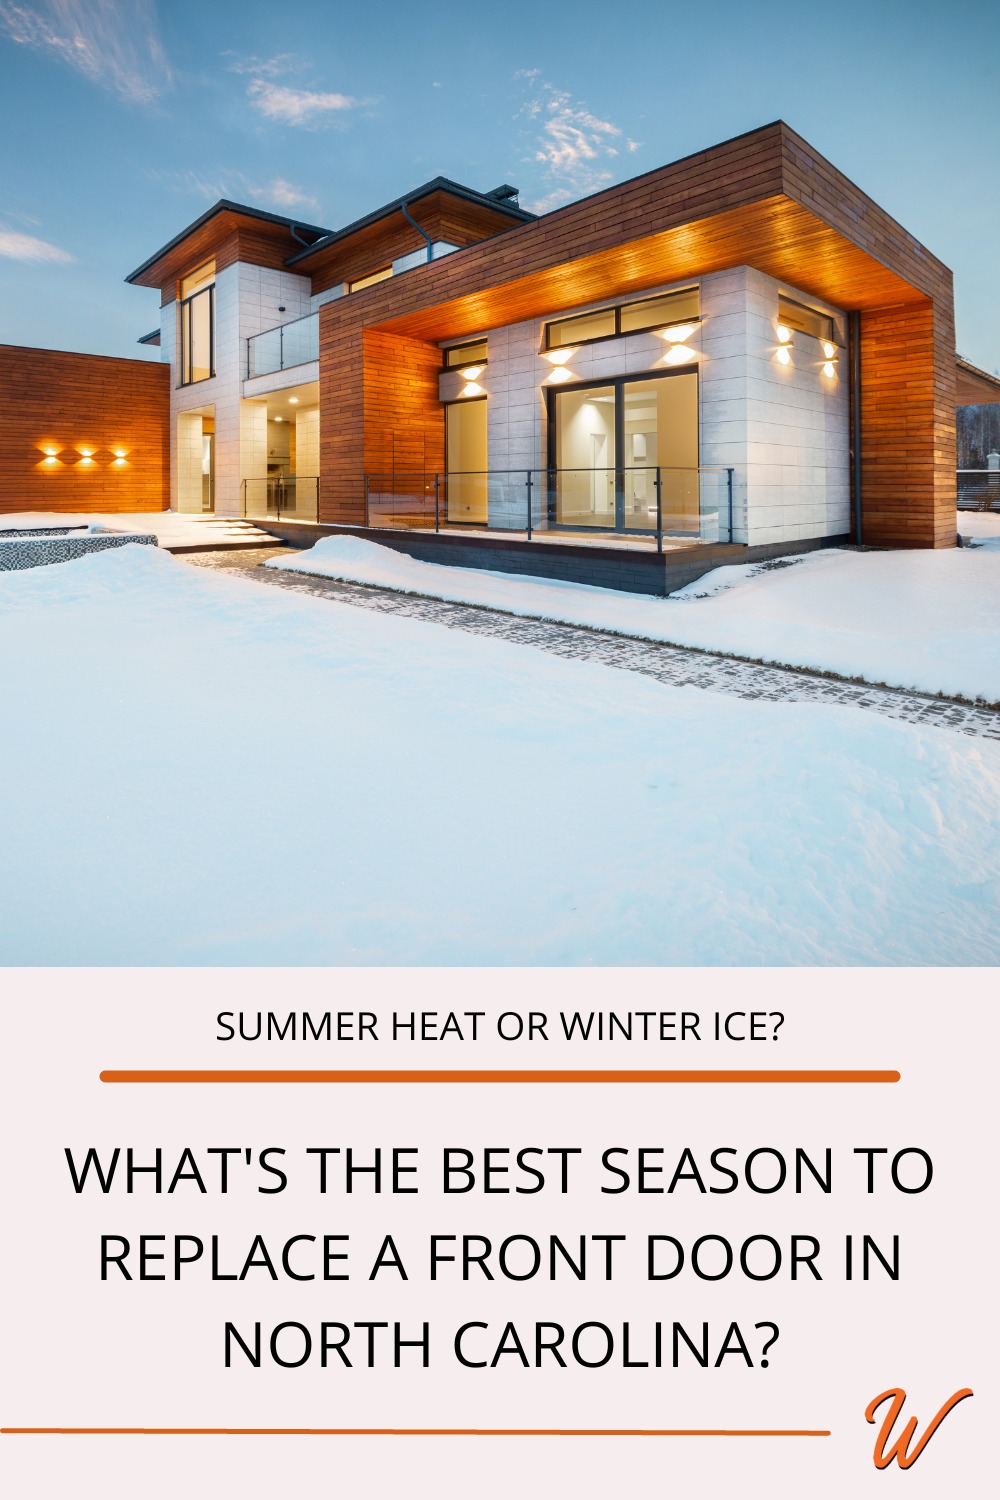 A contemporary home with recently fallen snow captioned with: Summer heat or winter ice? What's the best season to replace a front door in North Carolina?